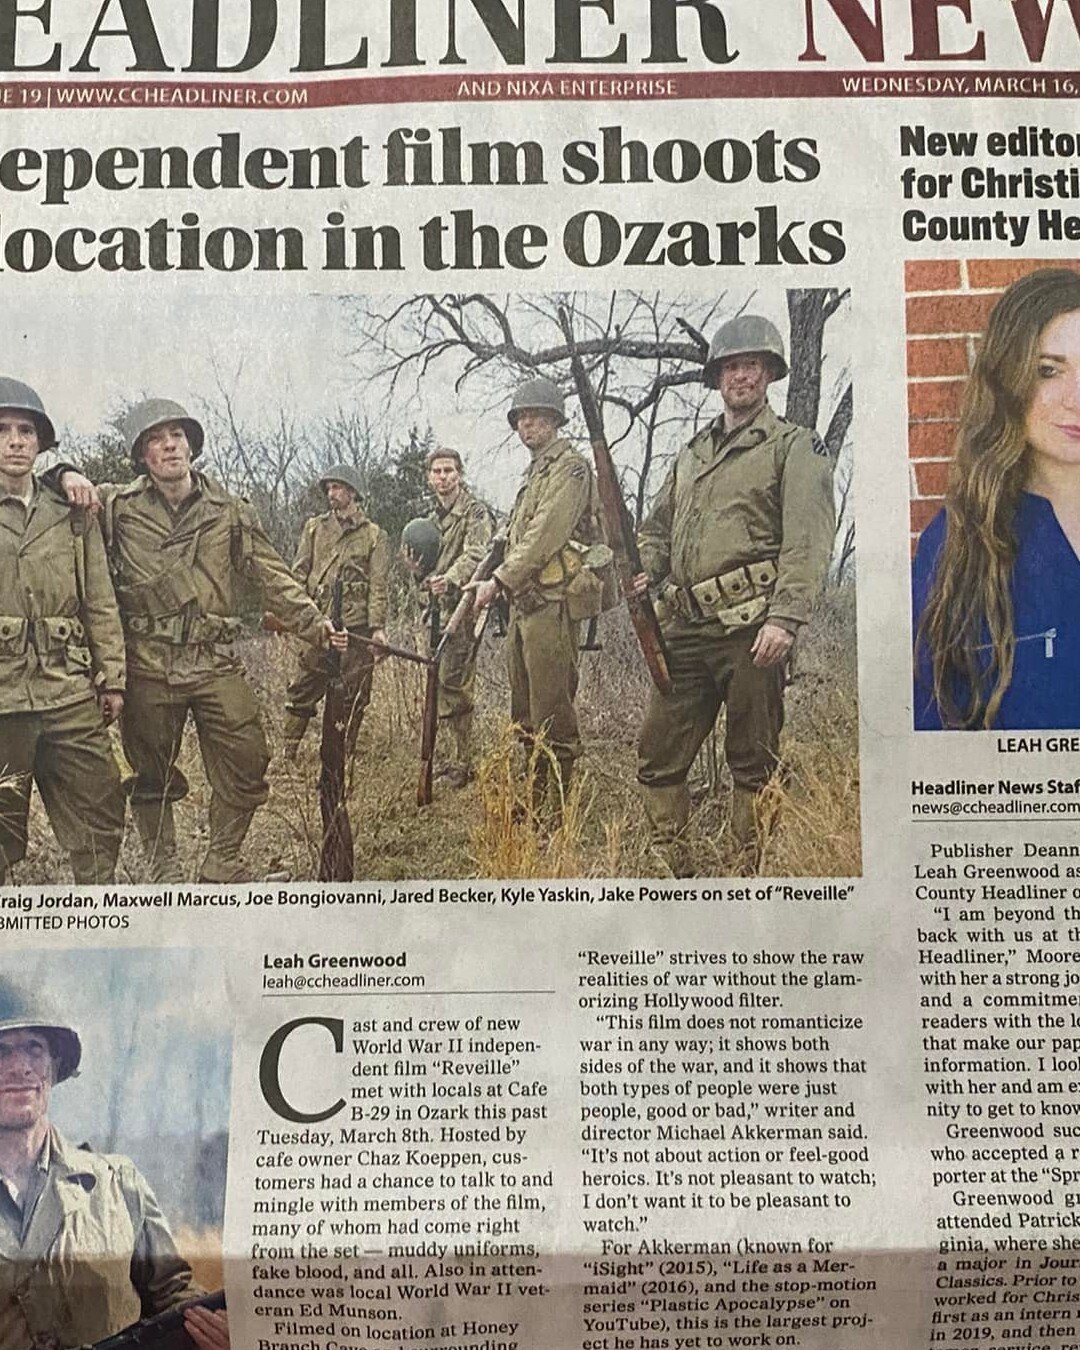 Thank you Leah Greenwood for Christian Country Headliner News story. To the producers, actors and crew of &ldquo;Reveille&rdquo;, we are all excited to see the movie when you release it!
.
.
.
#historylover #historynerd #ancientworld #ancient #worldh